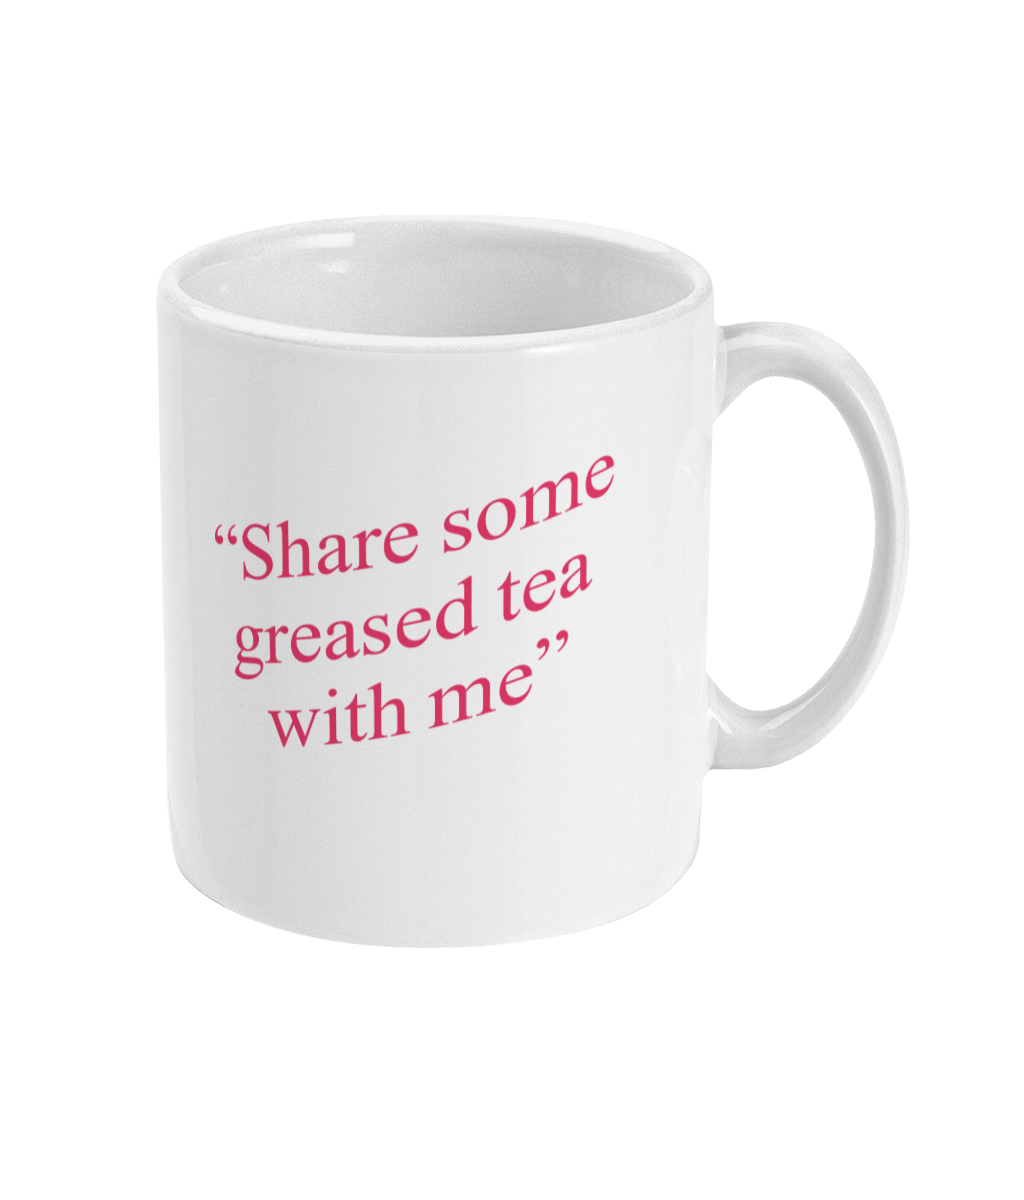 Lucette Henderson - "Share some greased tea with me" - Mug